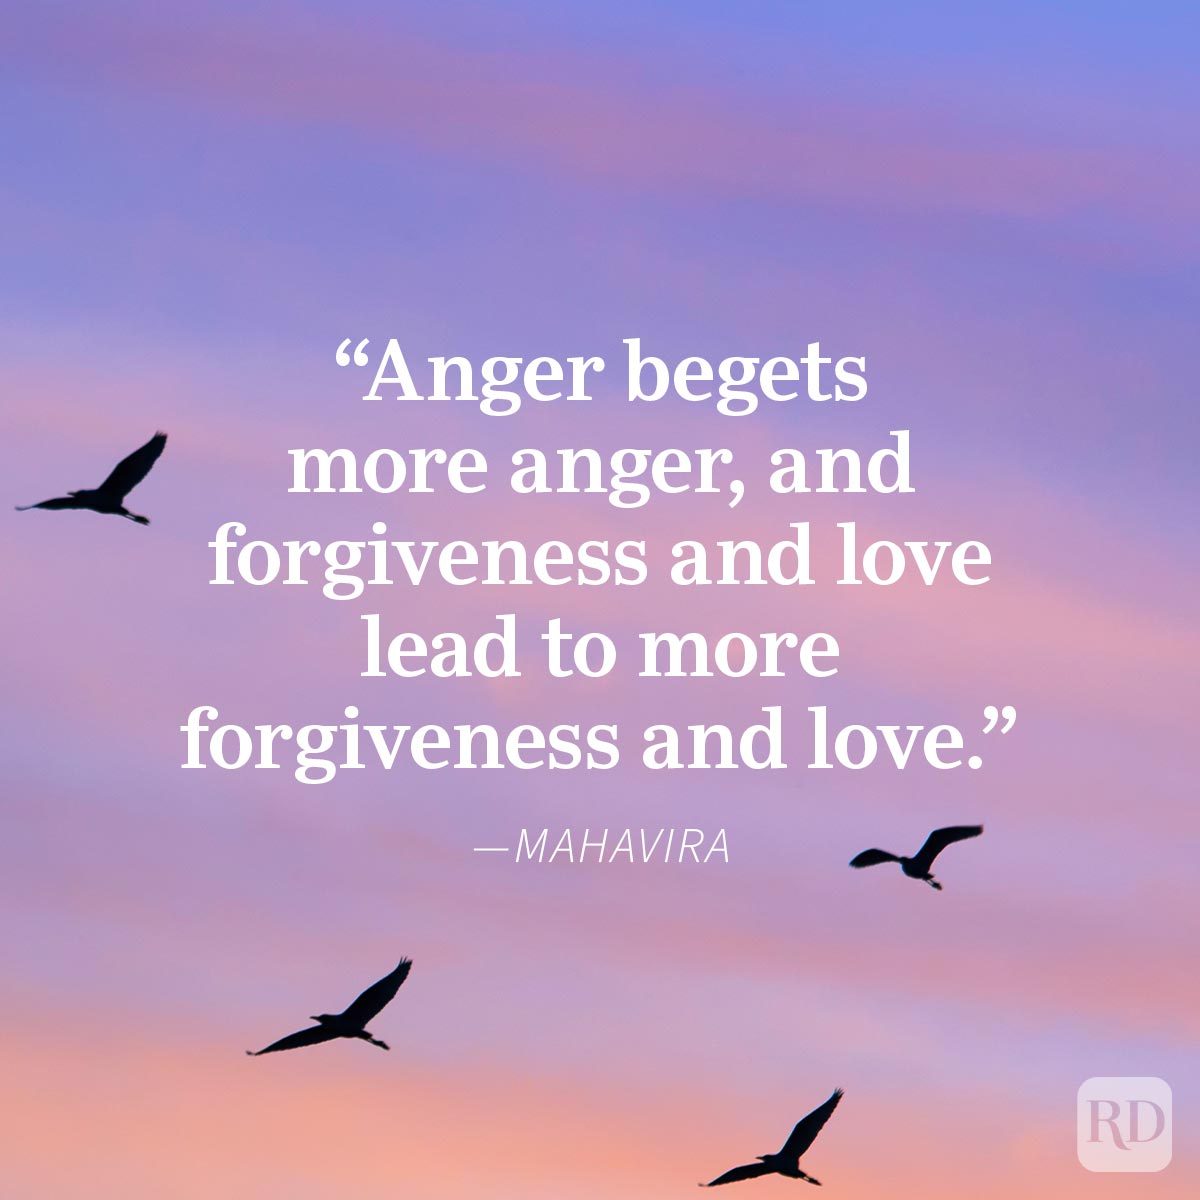 Forgiveness quotes about love on a peaceful sunset background with birds flying